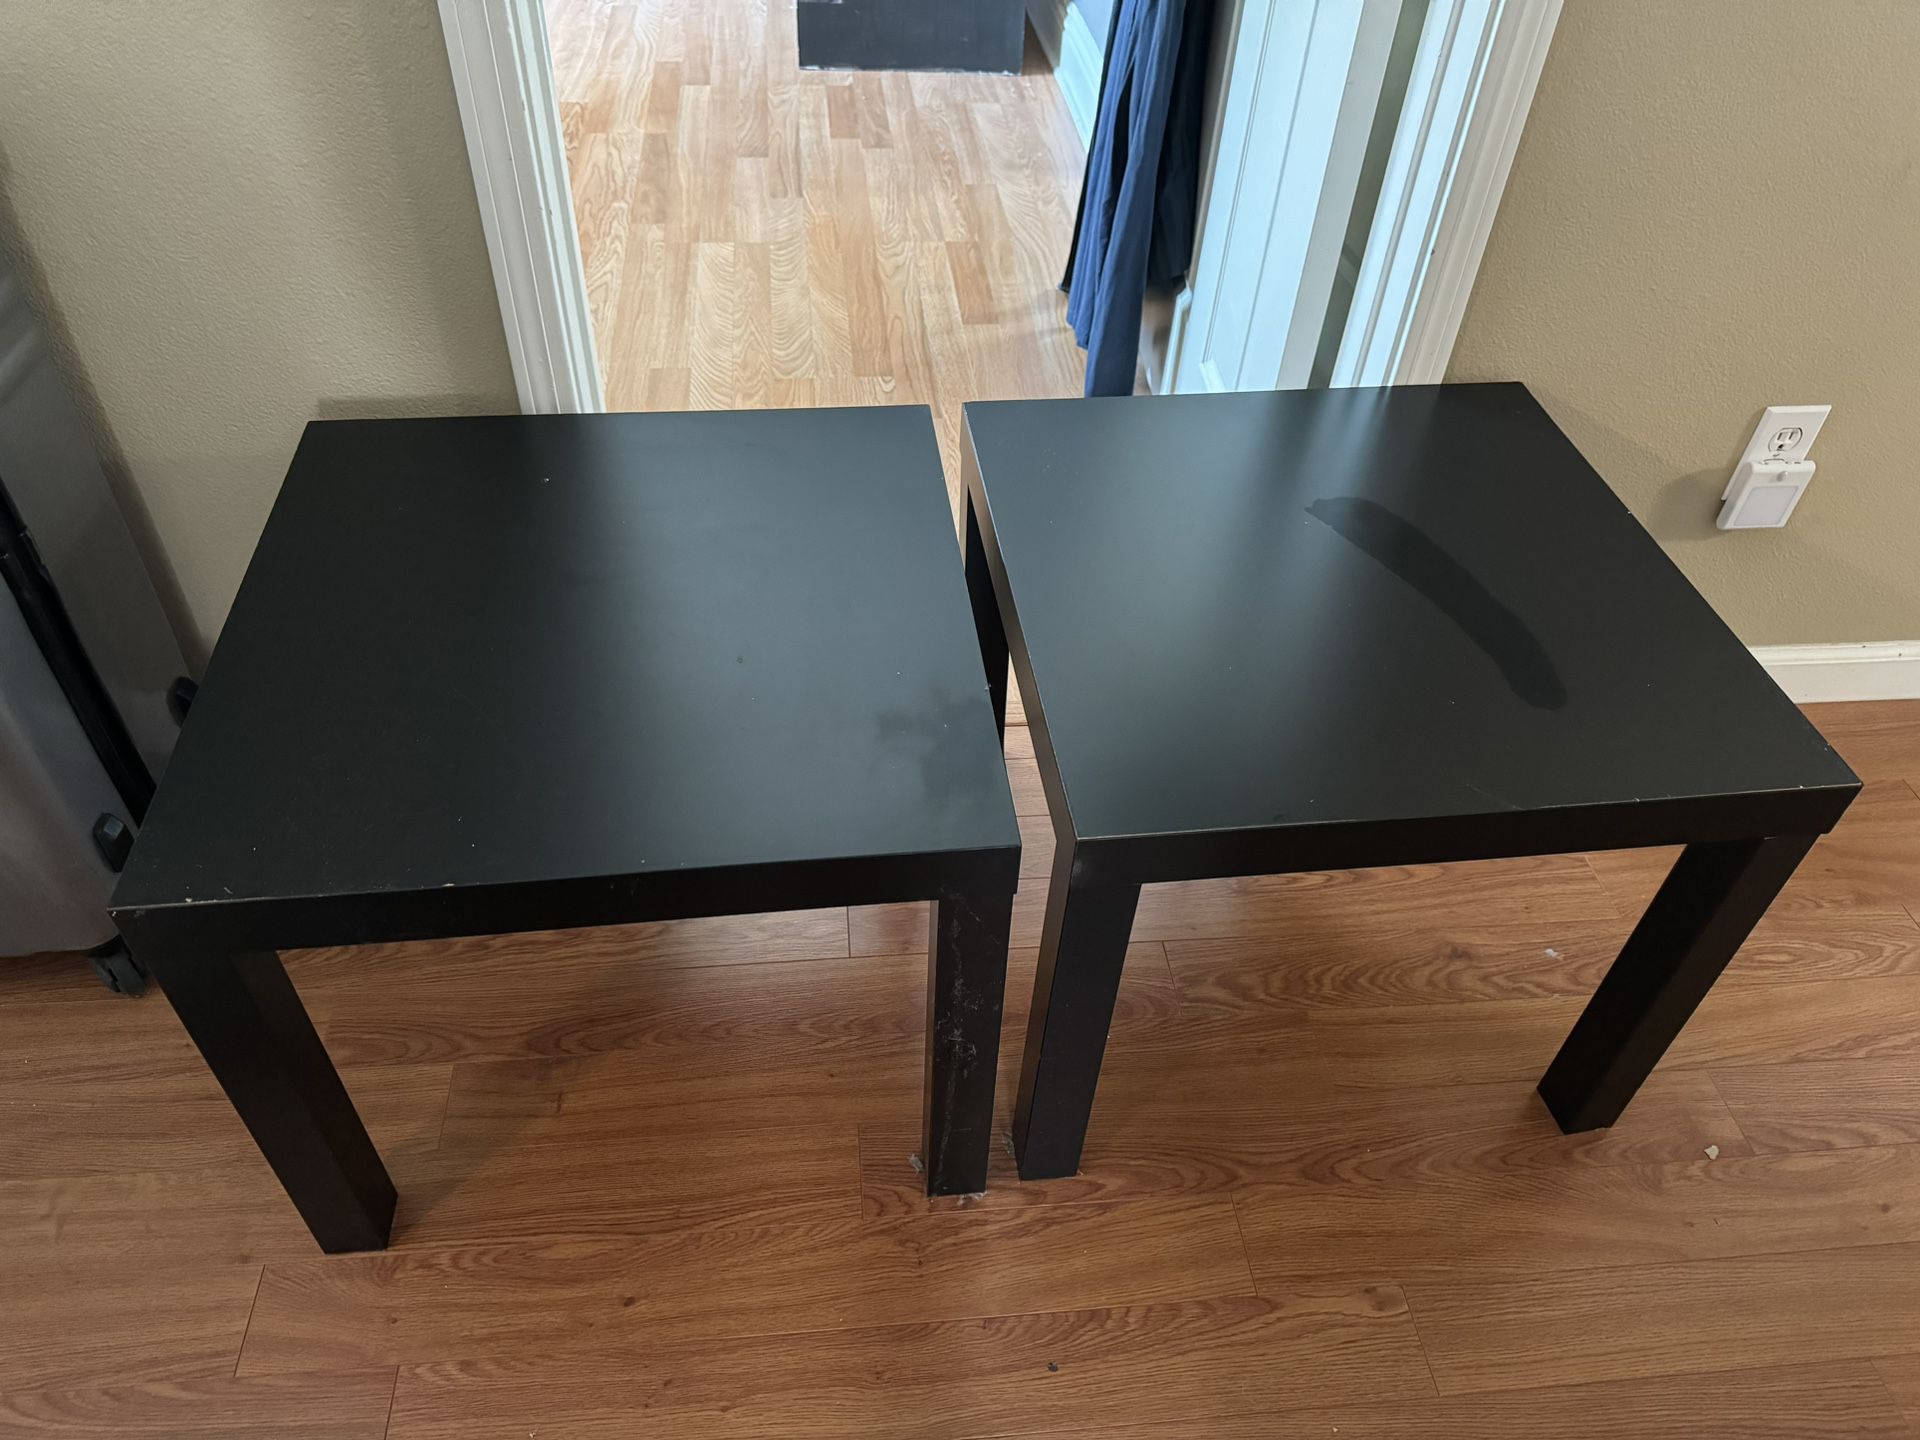 2 Small Tables